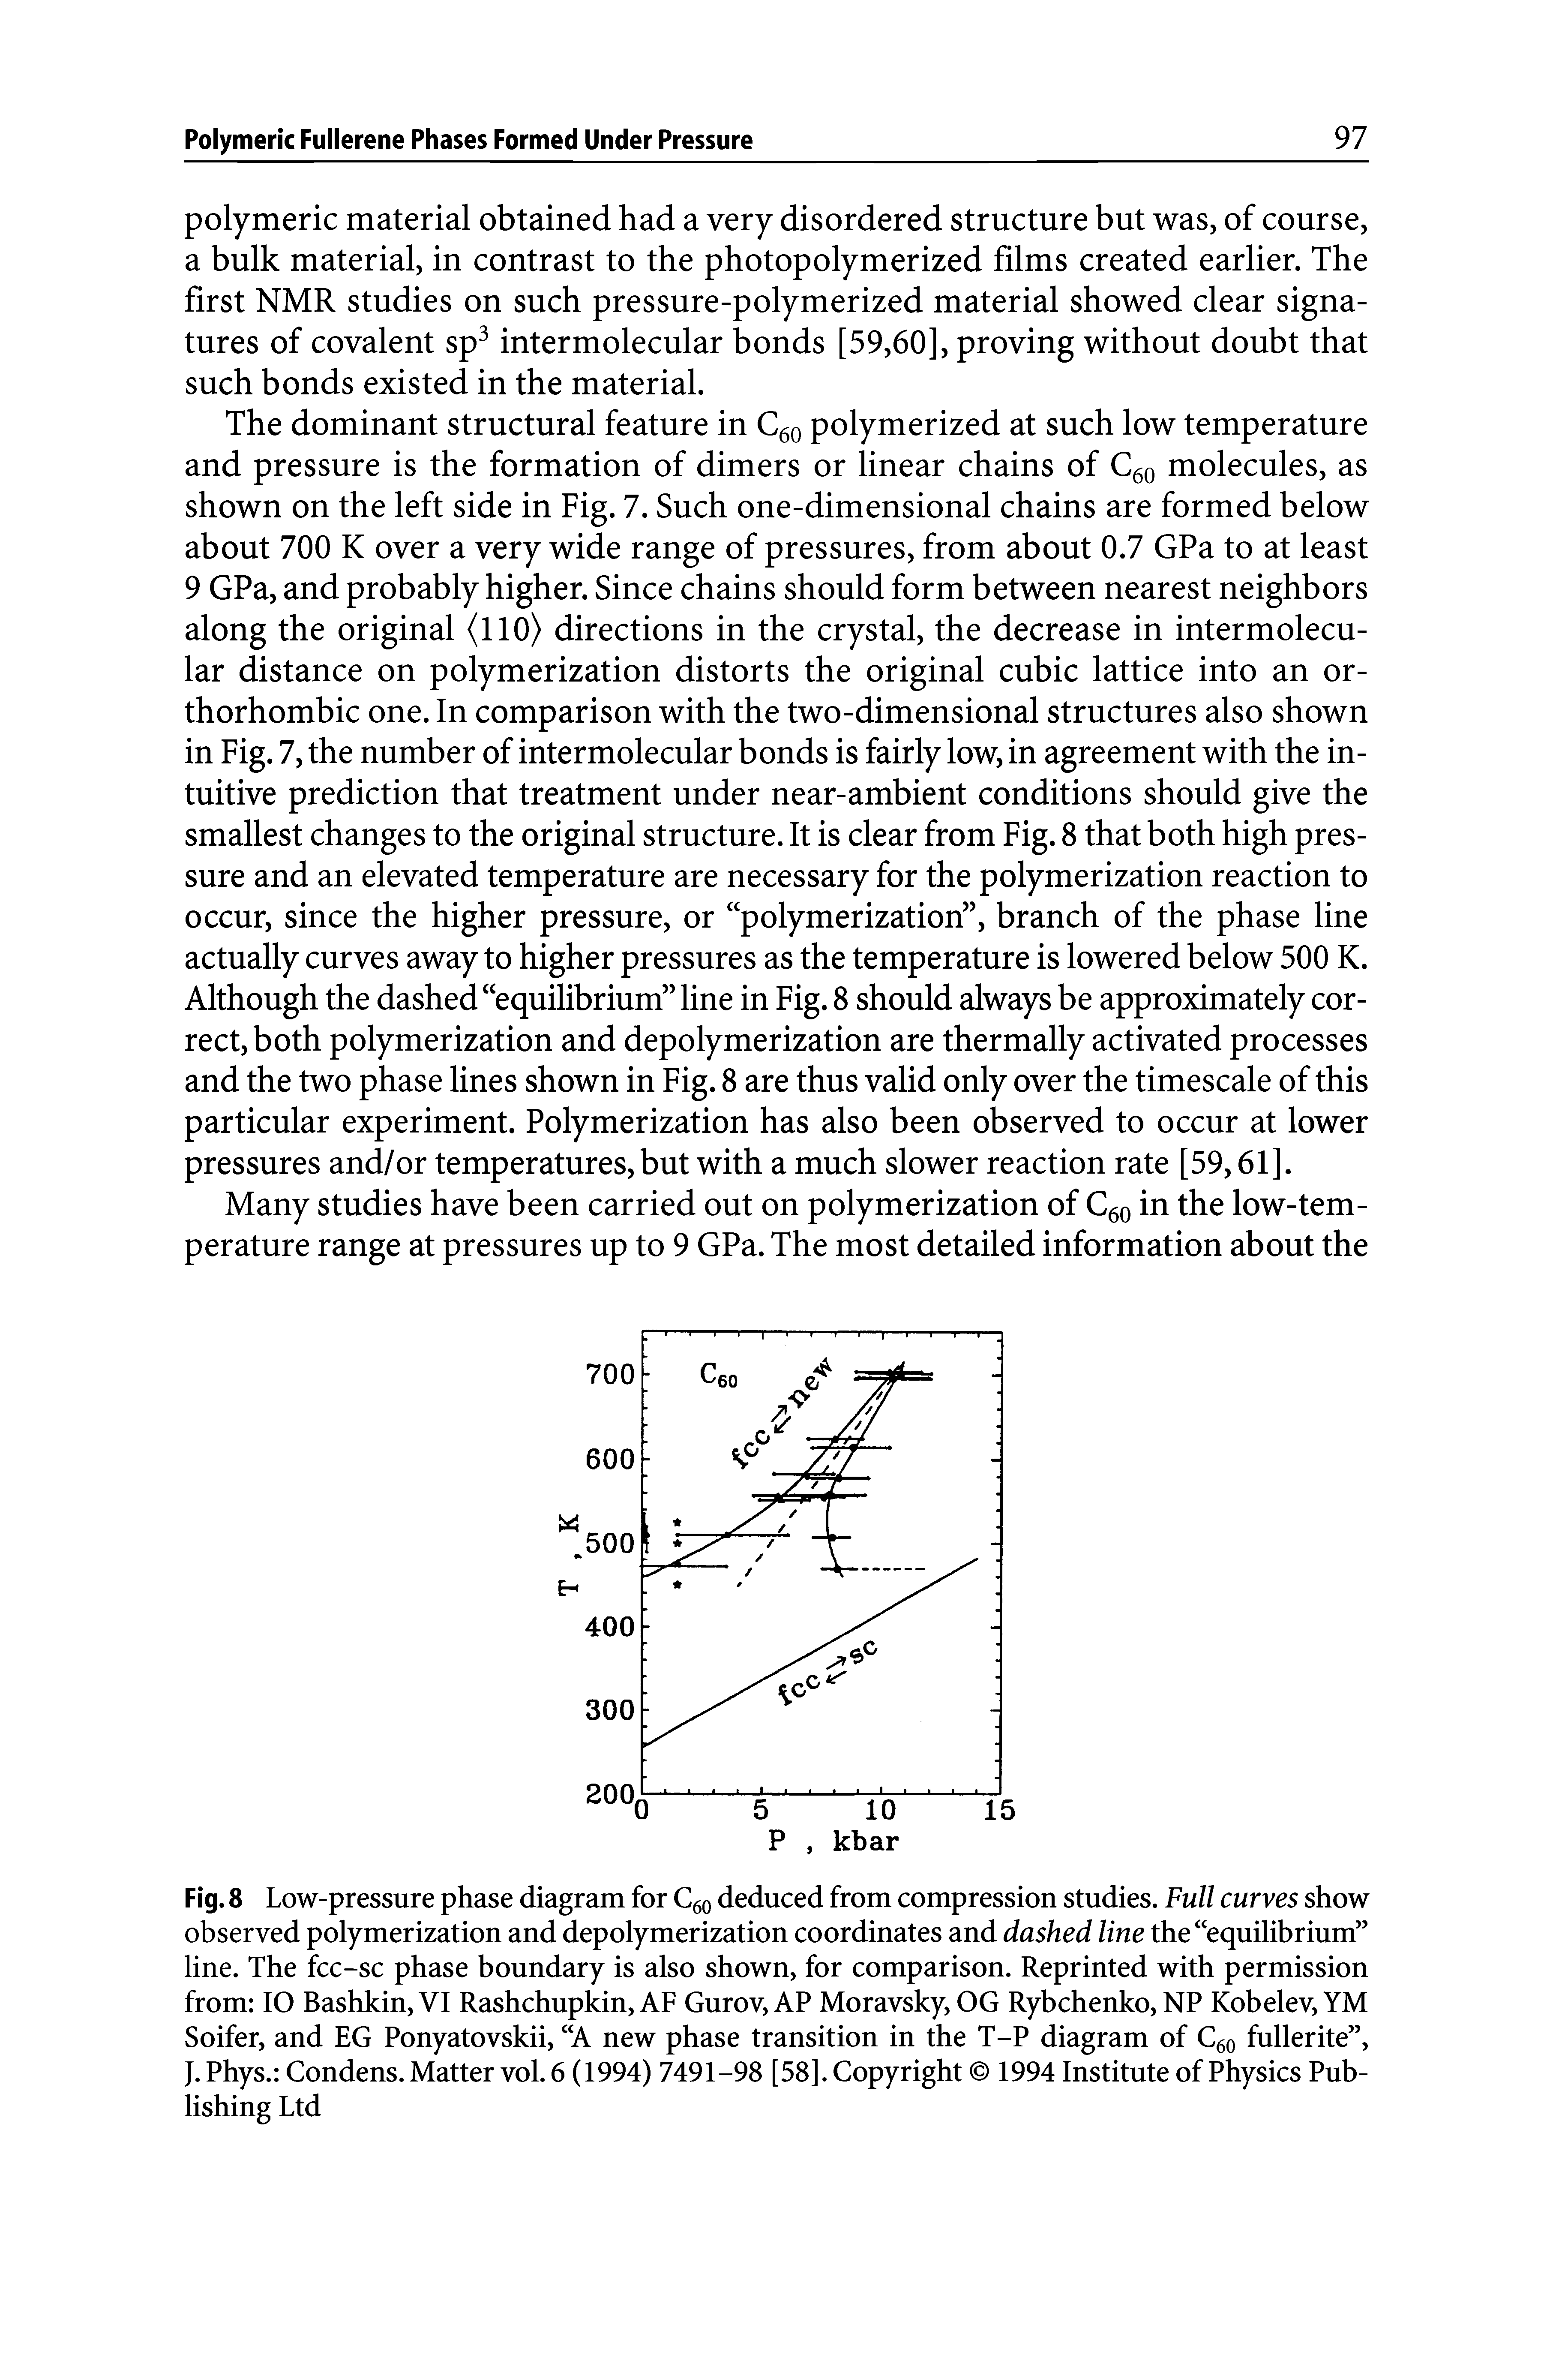 Fig. 8 Low-pressure phase diagram for C60 deduced from compression studies. Full curves show observed polymerization and depolymerization coordinates and dashed line the equilibrium line. The fcc-sc phase boundary is also shown, for comparison. Reprinted with permission from IO Bashkin, VI Rashchupkin, AF Gurov, AP Moravsky, OG Rybchenko, NP Kobelev,YM Soifer, and EG Ponyatovskii, WA new phase transition in the T-P diagram of C60 fullerite , J. Phys. Condens. Matter vol. 6 (1994) 7491-98 [58]. Copyright 1994 Institute of Physics Publishing Ltd...